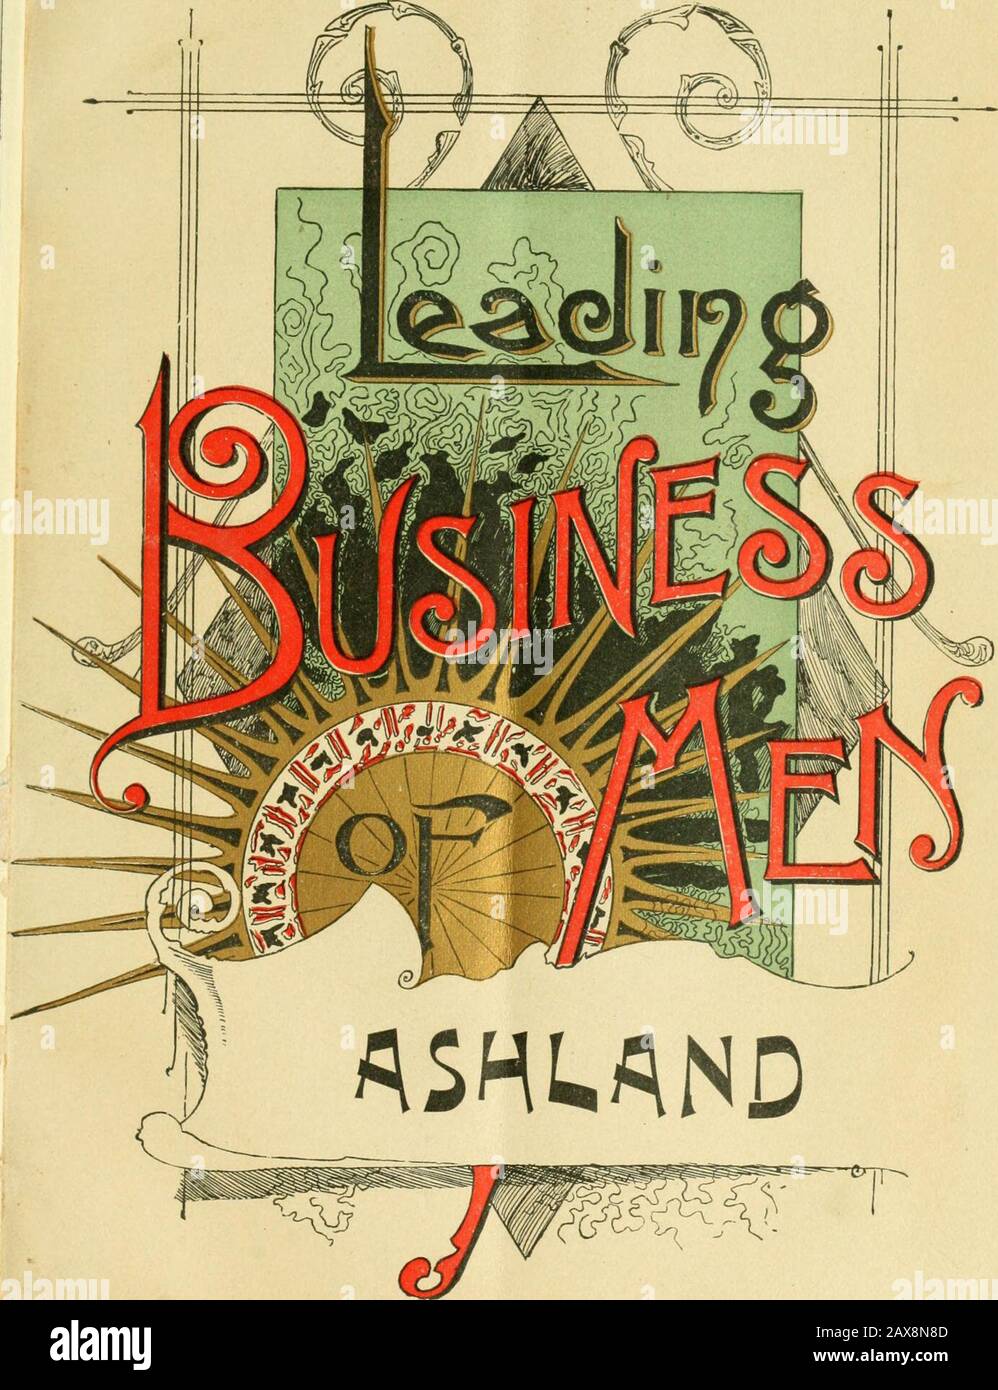 Leading business men of Milford, Hopkinton, and vicinity: embracing also Ashland, Holliston and Hopedale . enry S. (harness) 13 Crofoot, A. S. (cin and sheet iron worker) 12 Field, Z. C. (lumber) 15 Hopedale Ice Co 31 Hoyt&Hill (plumbers) 17 Haudmore, P. J. (cigar mfg.) 23 Milford Dye House and Steam Scouring Estaiilishment 10 Parker, Geo. G. (insurance) 8 Reynt)lds, Wm. F. (light jobbing in wood) 24 Smith, J. L. (tin and wooden ware). ... 21 Temple, E. L. (photographer) 14 NEWSDEALERS, STATIONERS AND FANCYGOODS. Adams, O. M. Mrs 16 Cheney, Everett Mrs 19 Davis, S. A 52 Fiske, J. F 61 Power, M Stock Photo